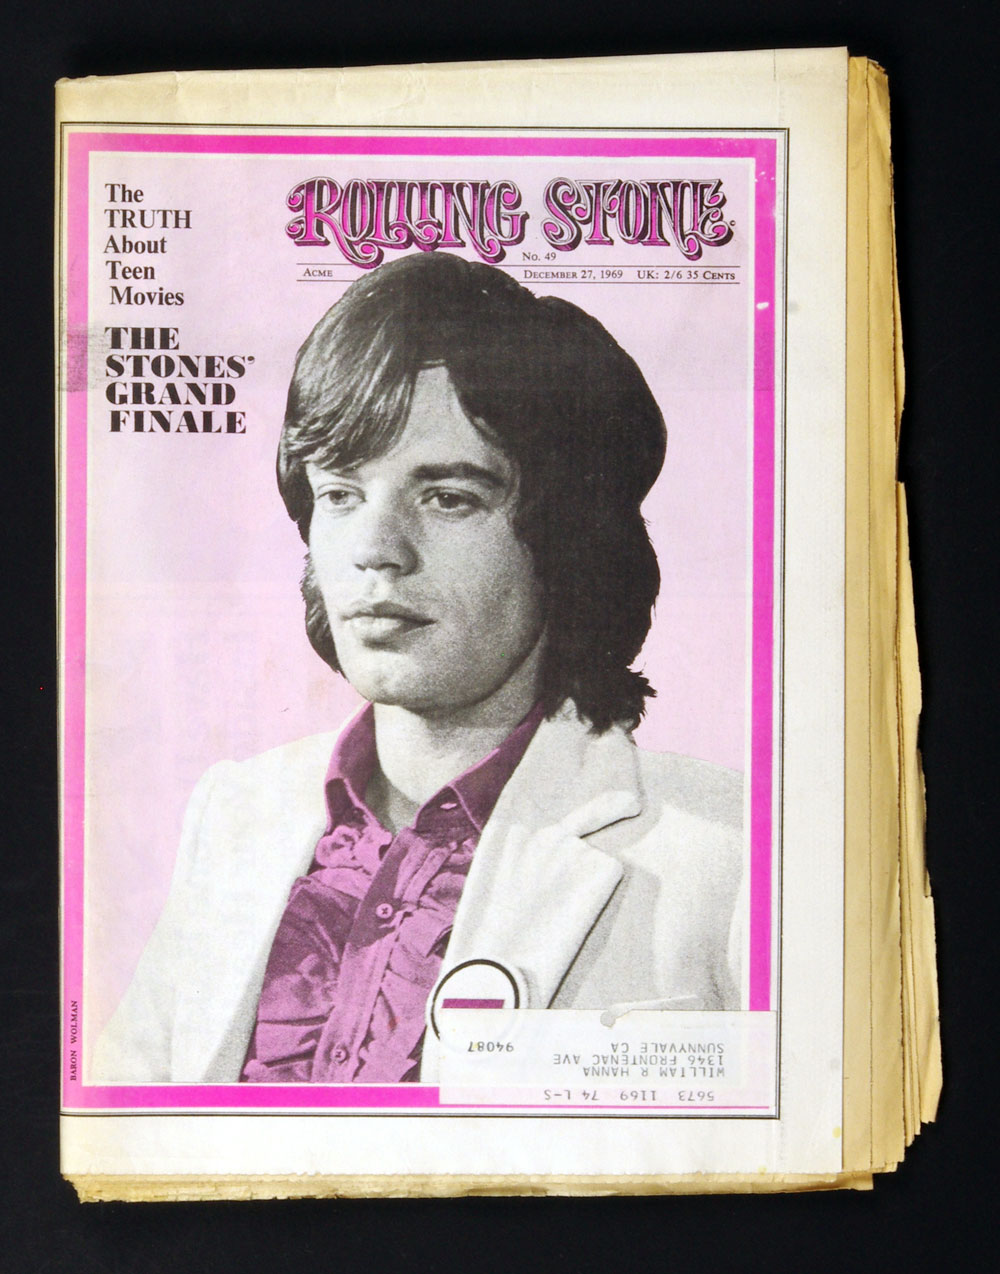 Rolling Stone Magazine Back Issue 1969 Dec 27 No. 49 Mick Jagger 